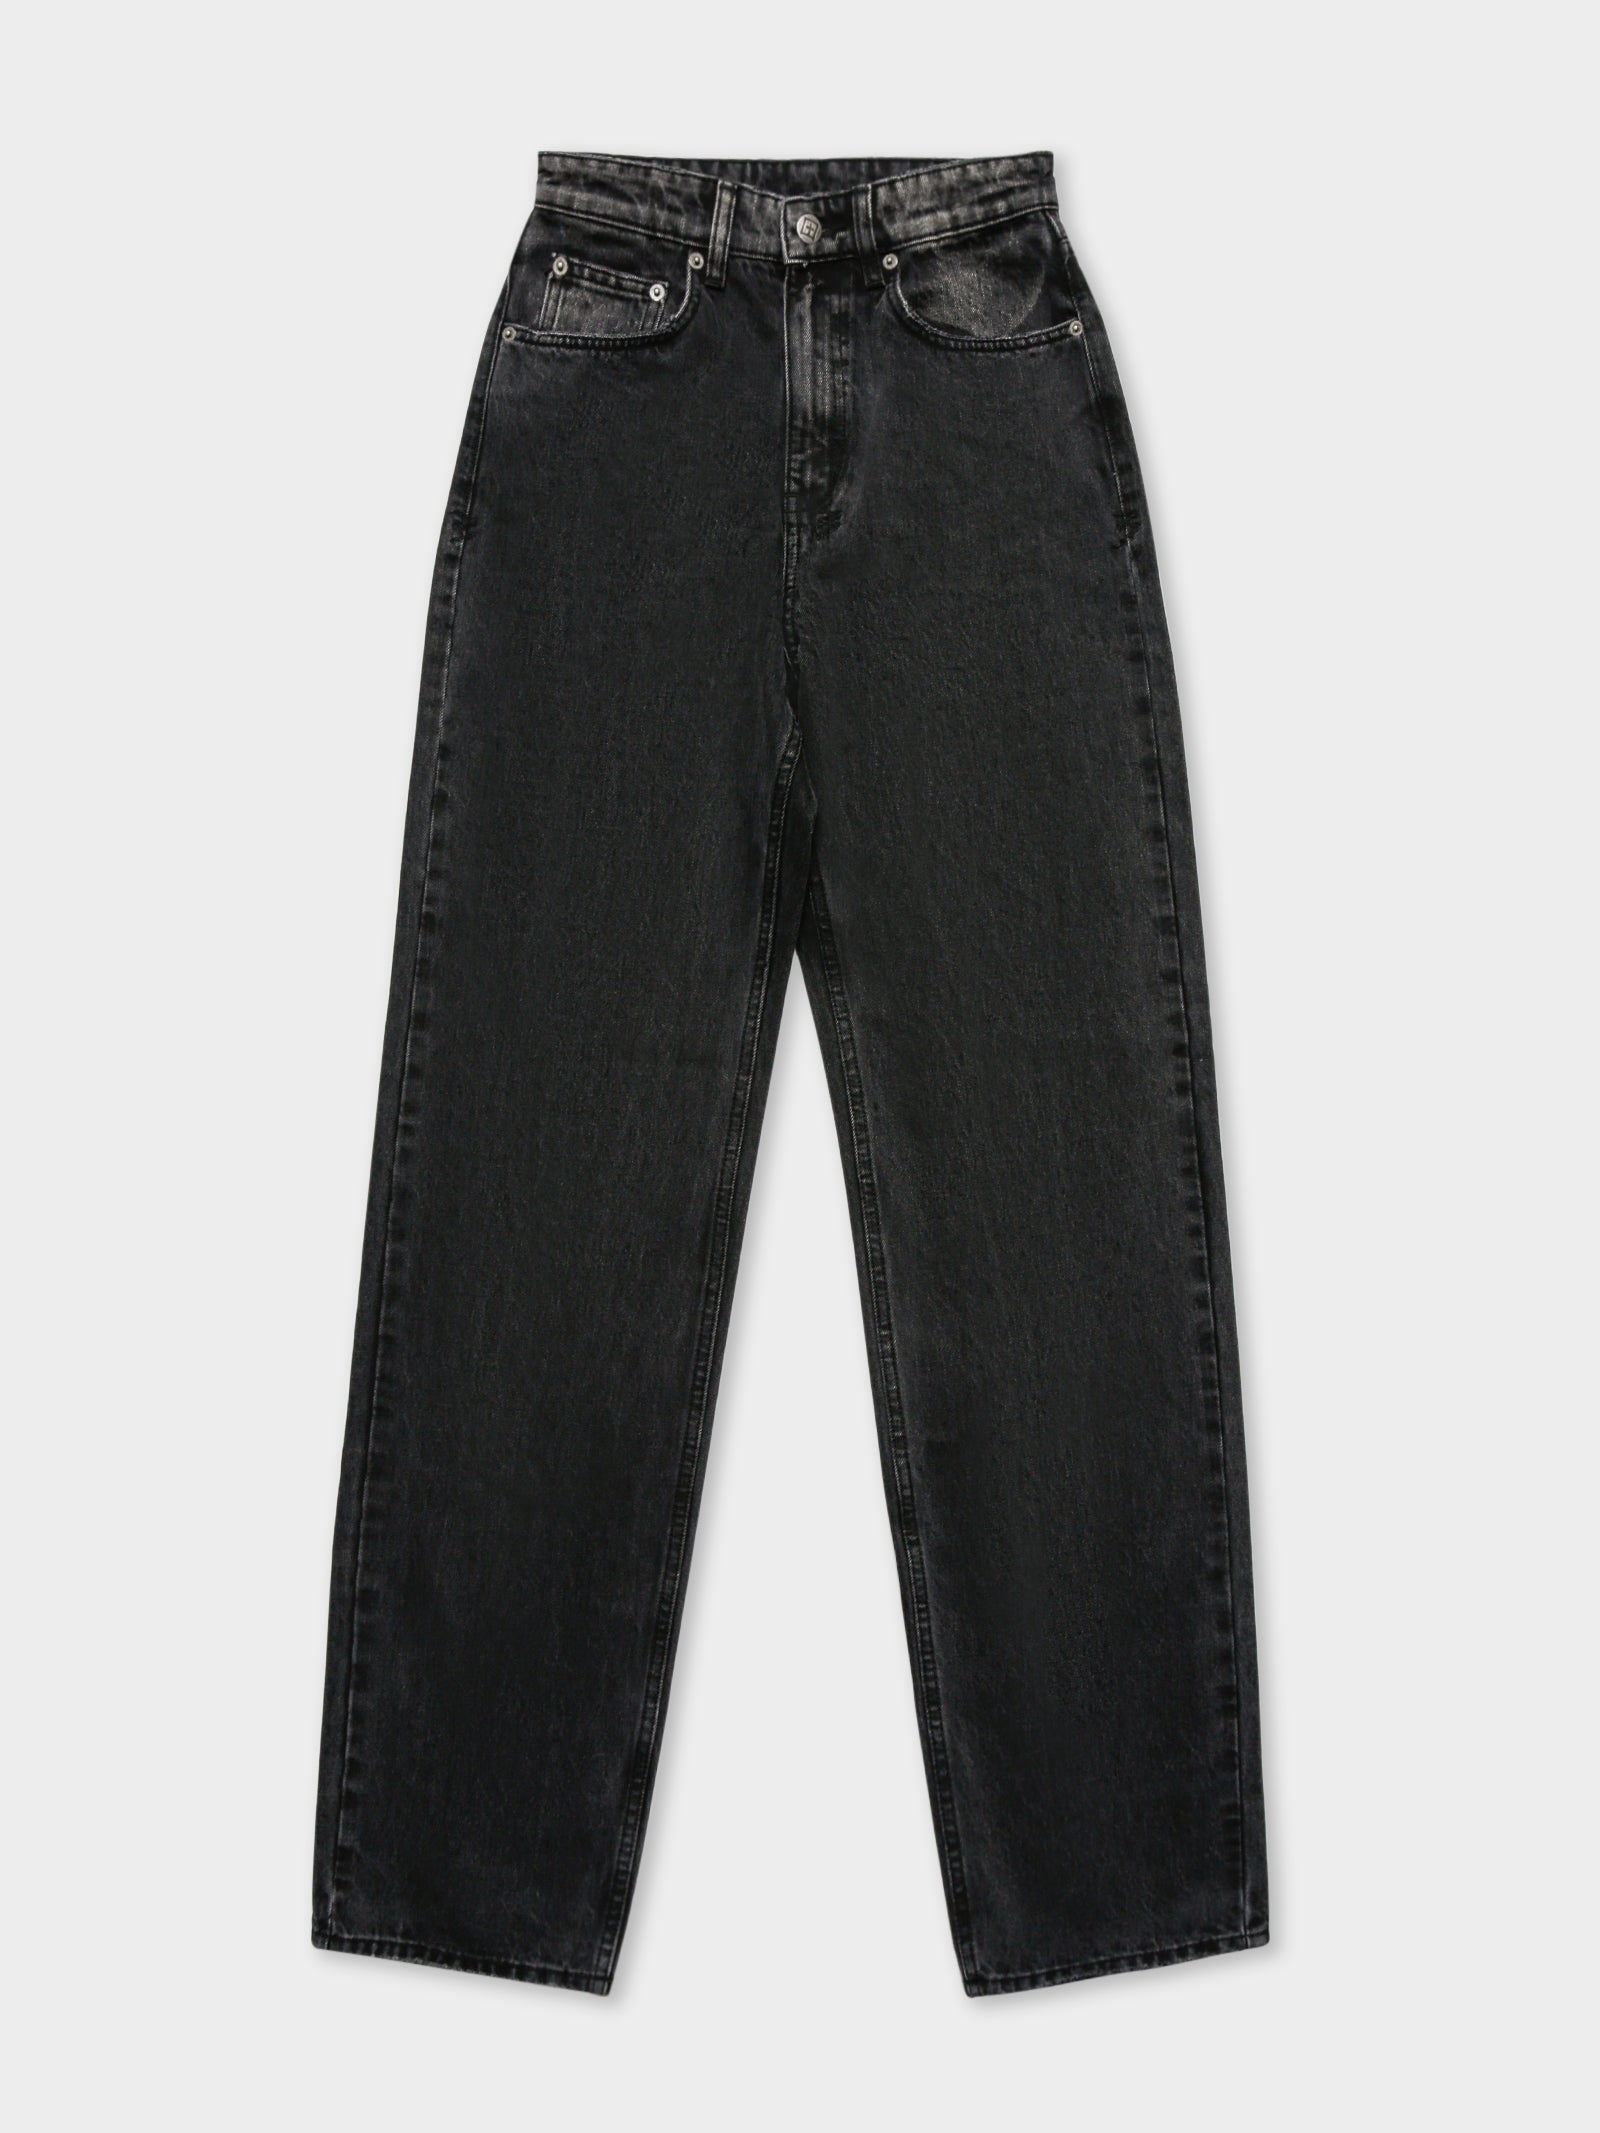 Playback Onyx Jeans in Black - Glue Store